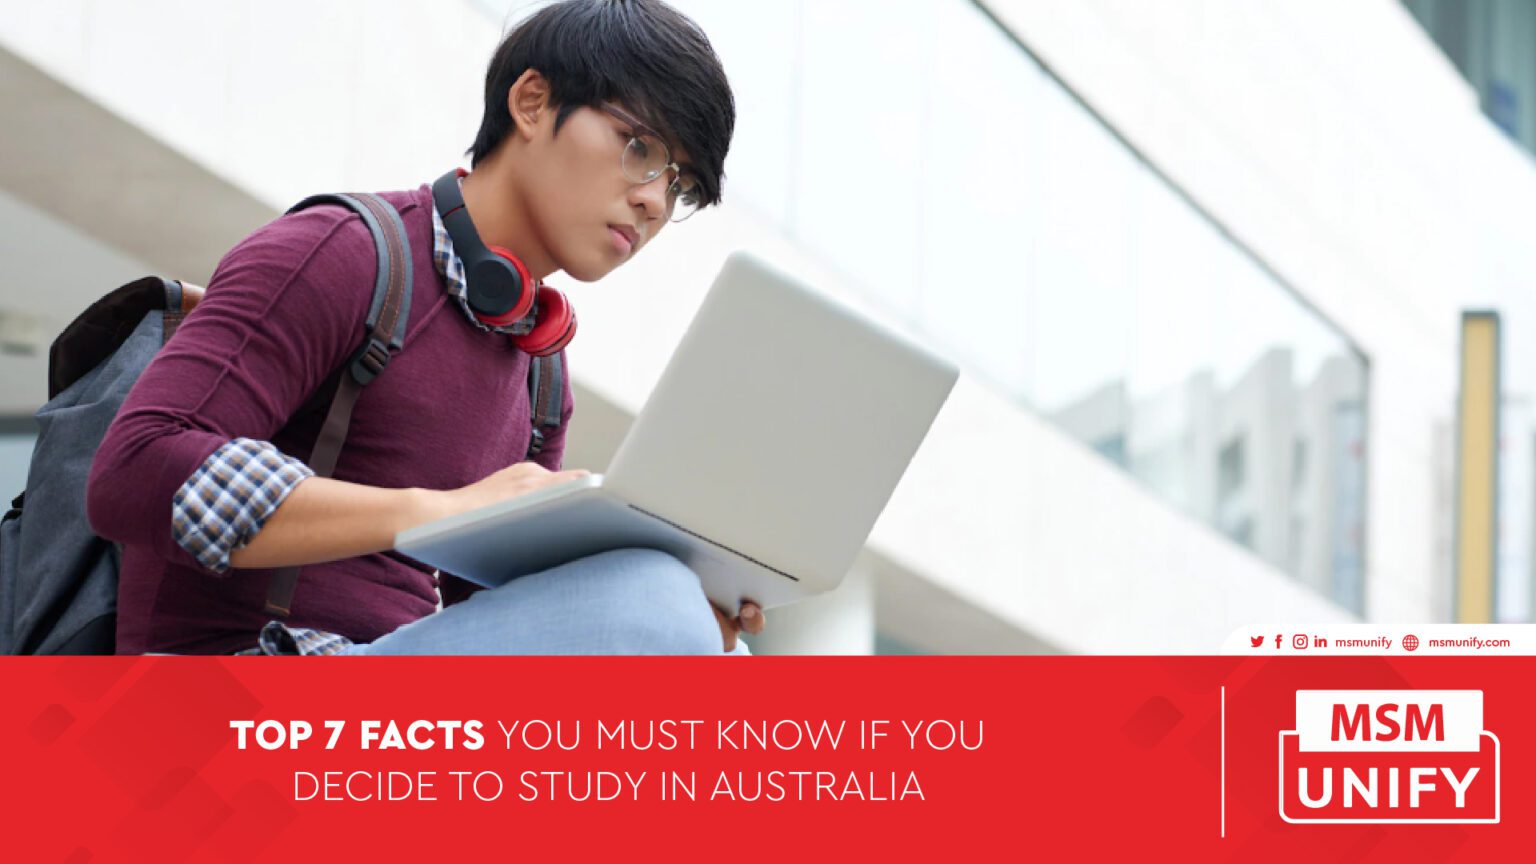 Top 7 Facts You Must Know about Australia